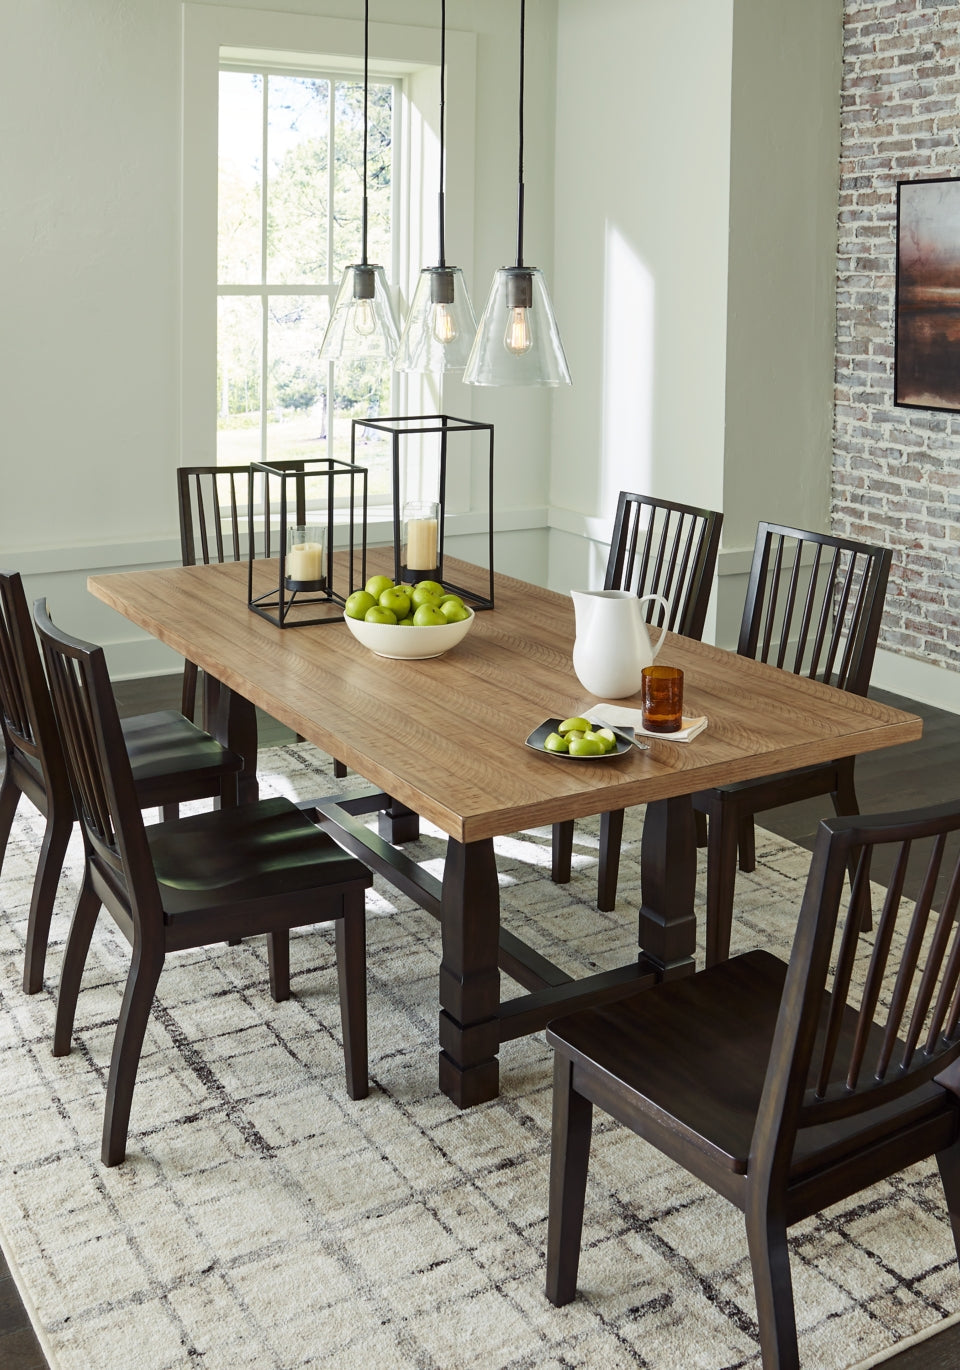 Charterton Dining Table and 6 Chairs - furniture place usa